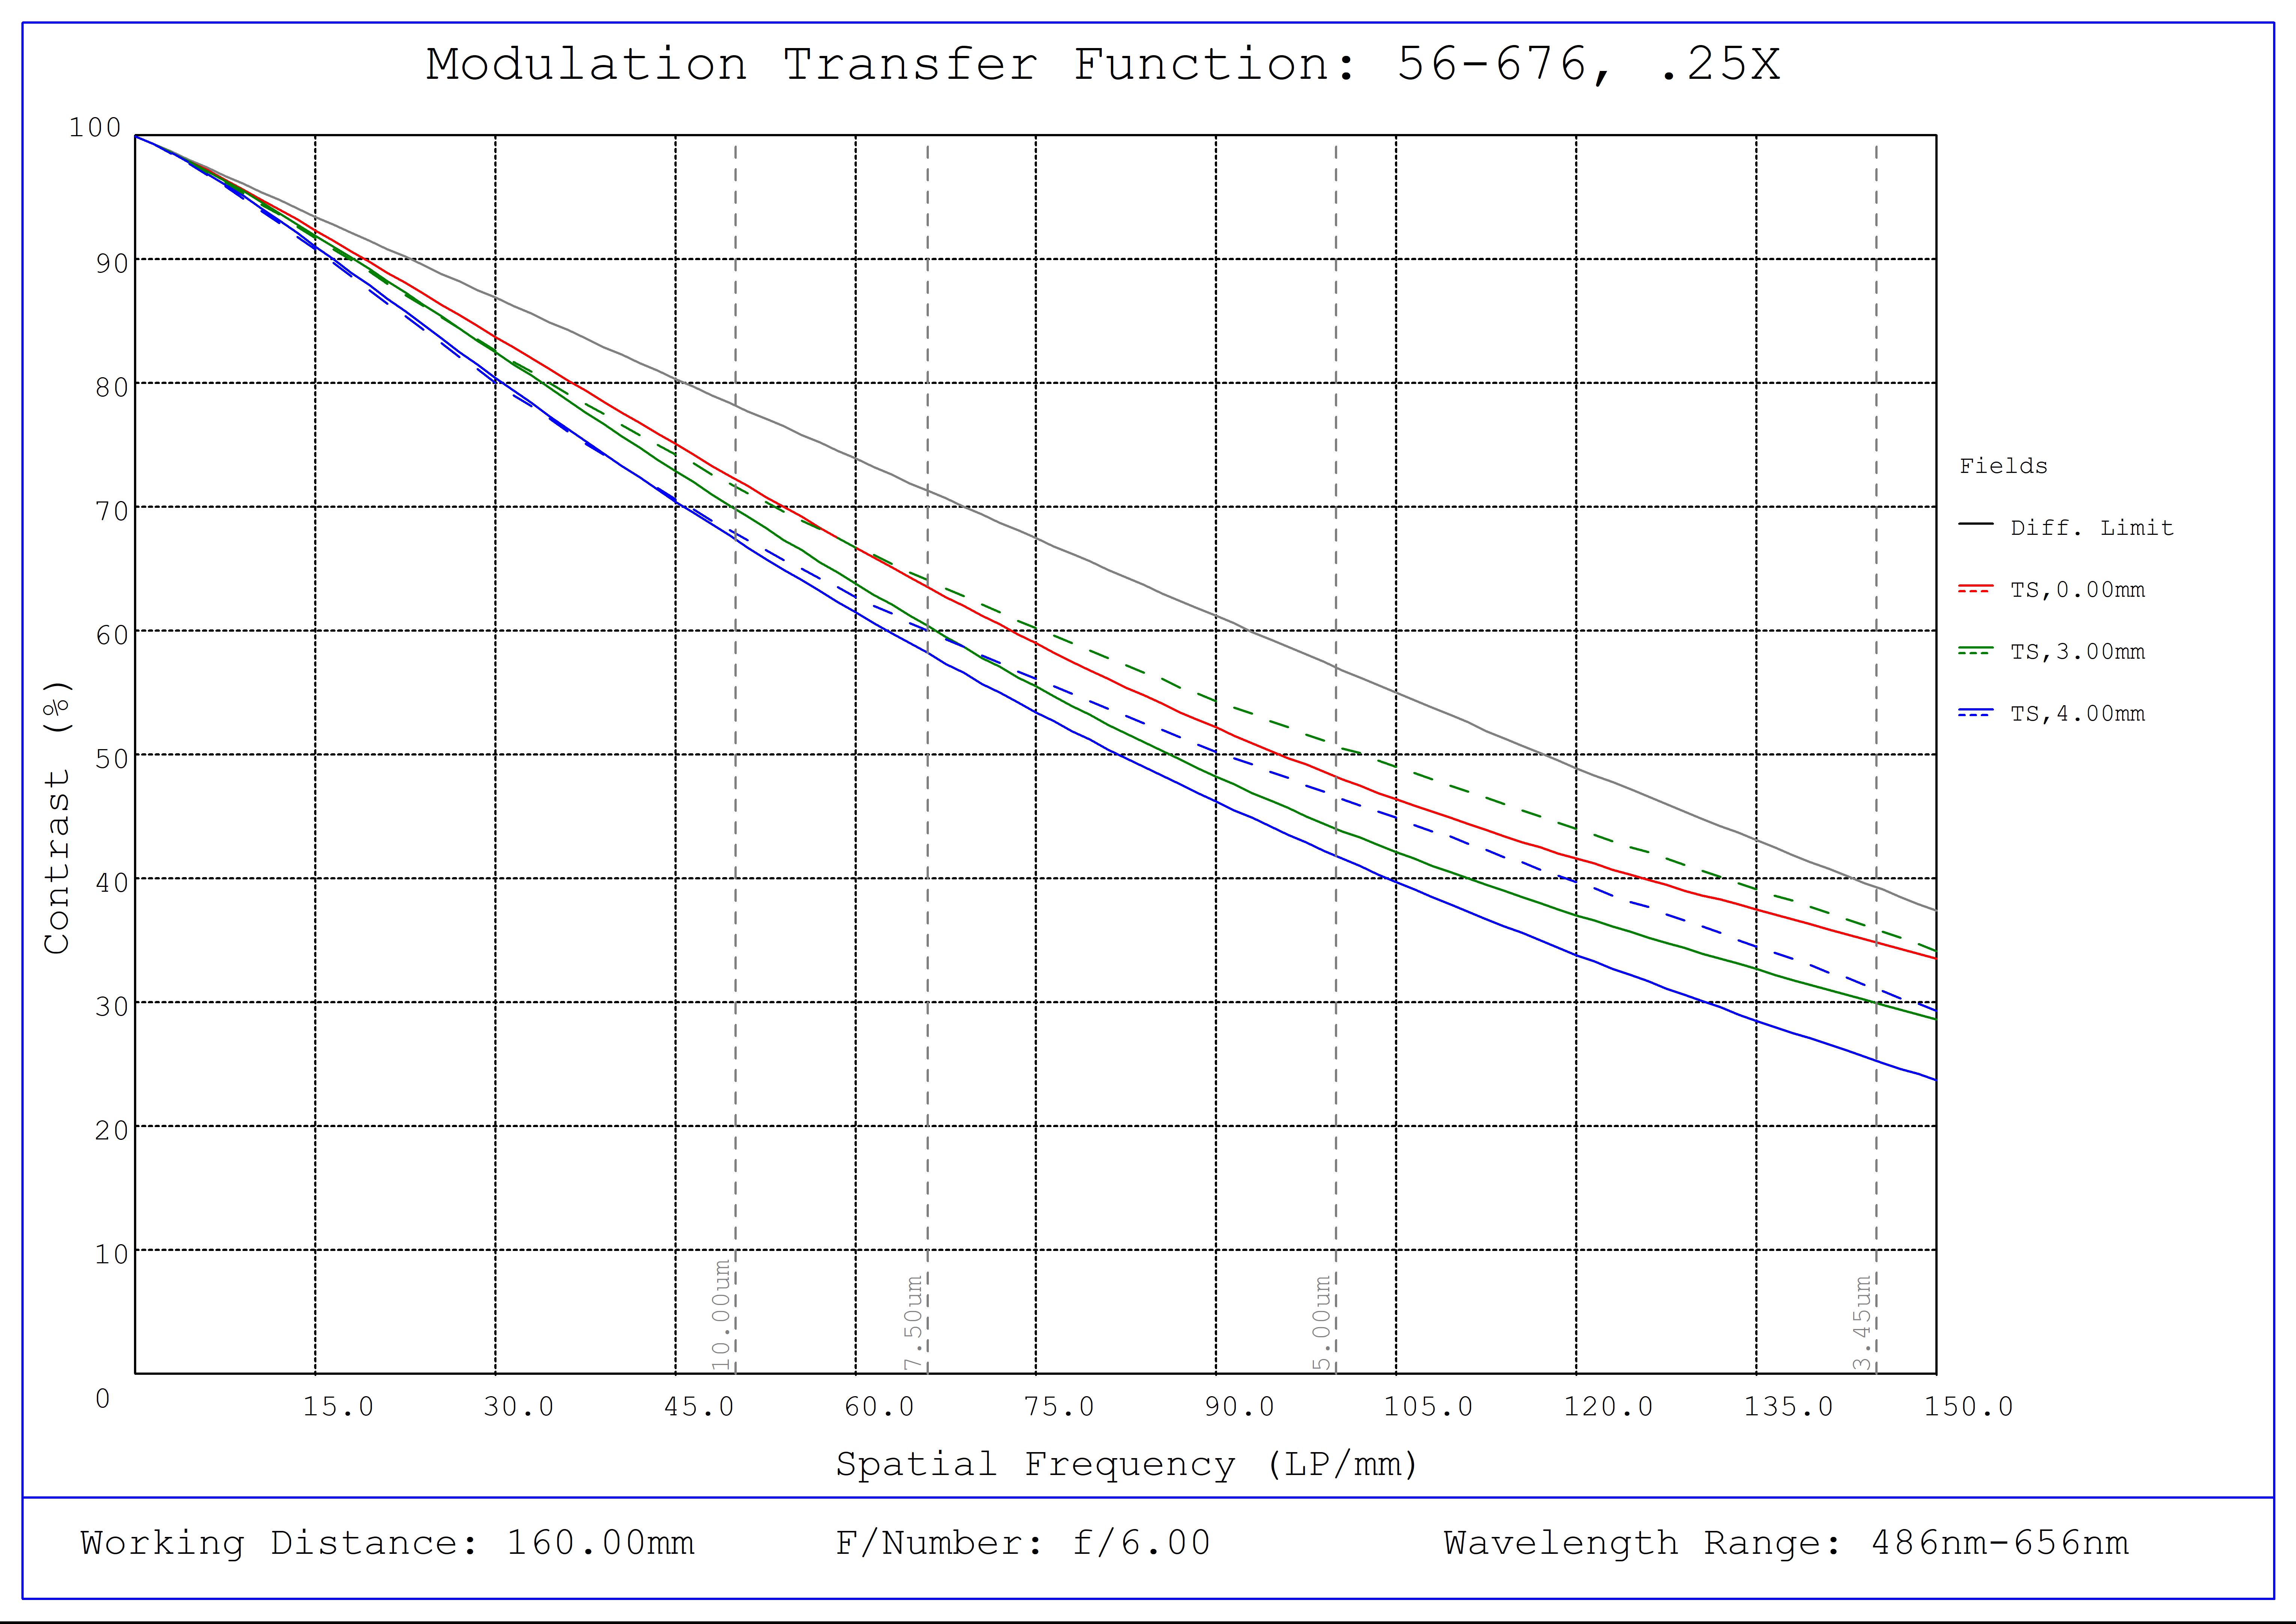 #56-676, 0.25X SilverTL™ Telecentric Lens, Modulated Transfer Function (MTF) Plot, 160mm Working Distance, f6